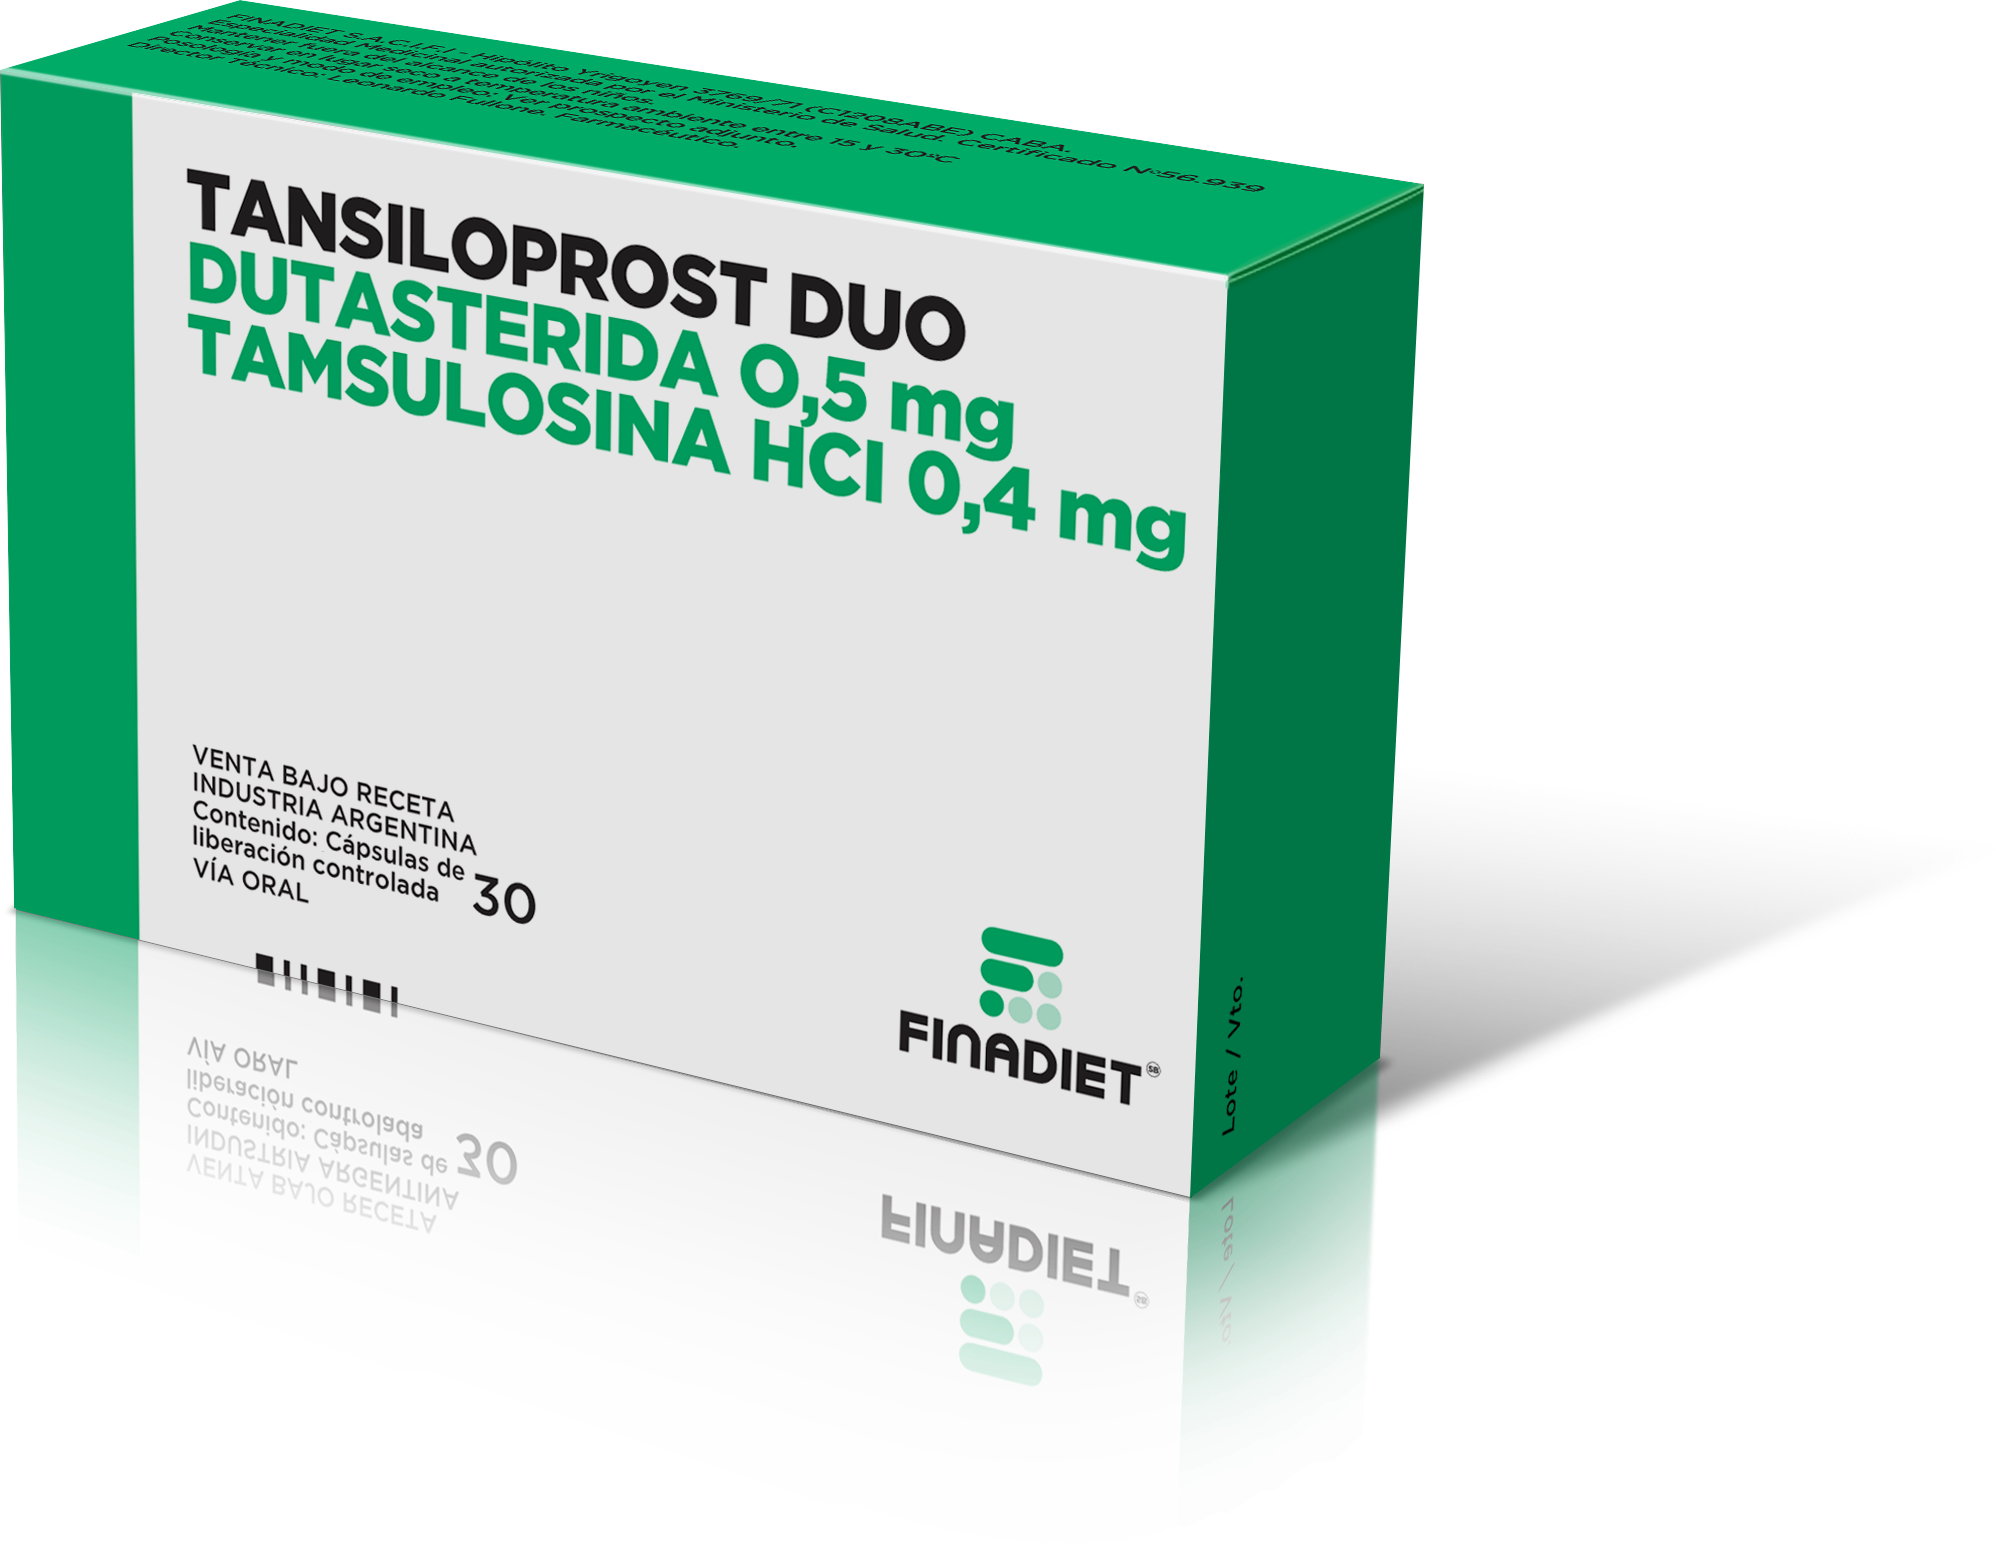 TANSILOPROST DUO